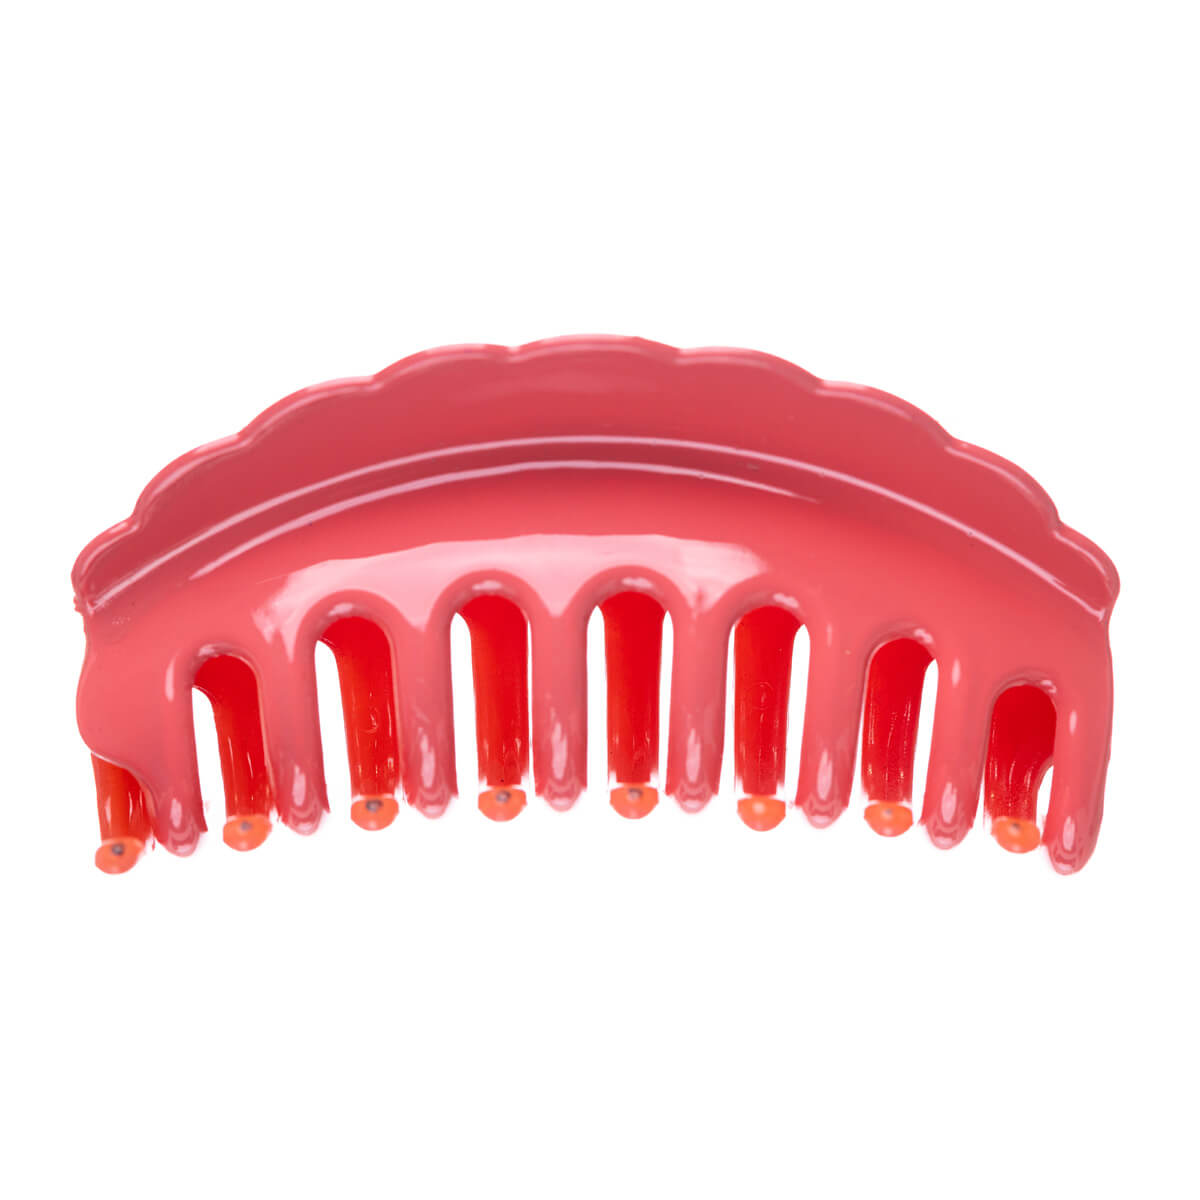 Hain Tooth STOR CURVED 10 cm